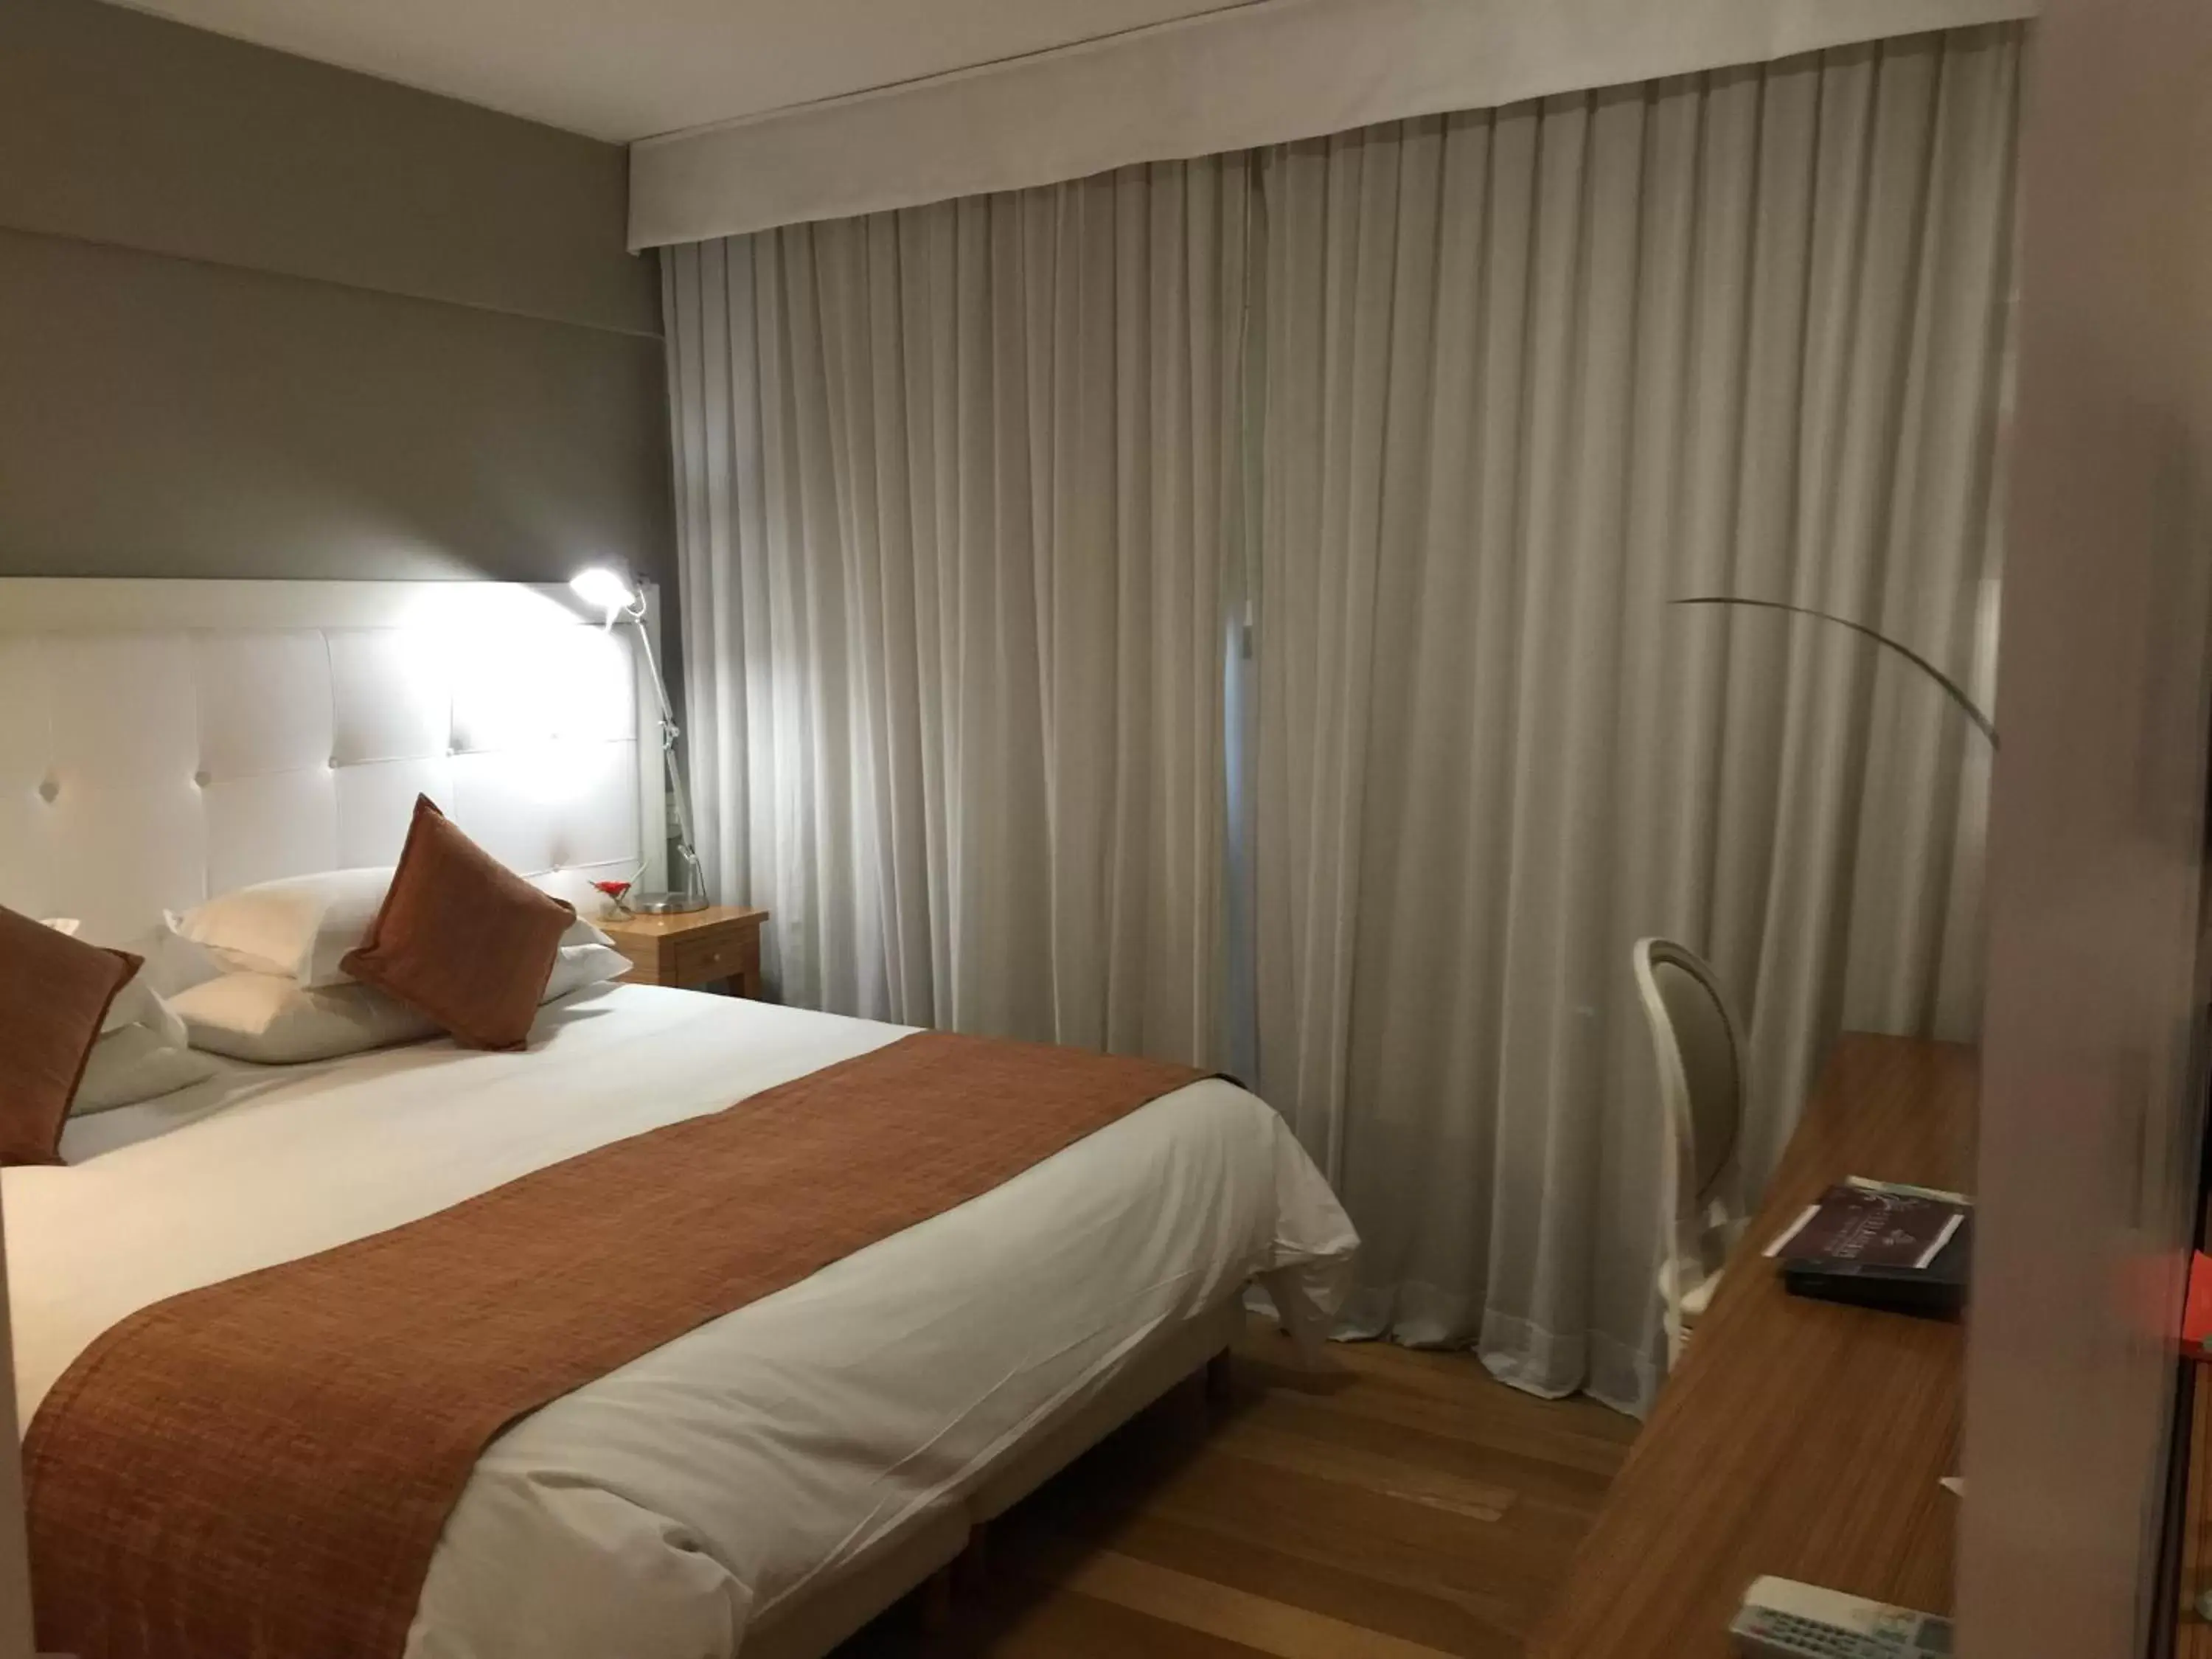 Luxury Double Room with Spa Bath in Purobaires Hotel Boutique